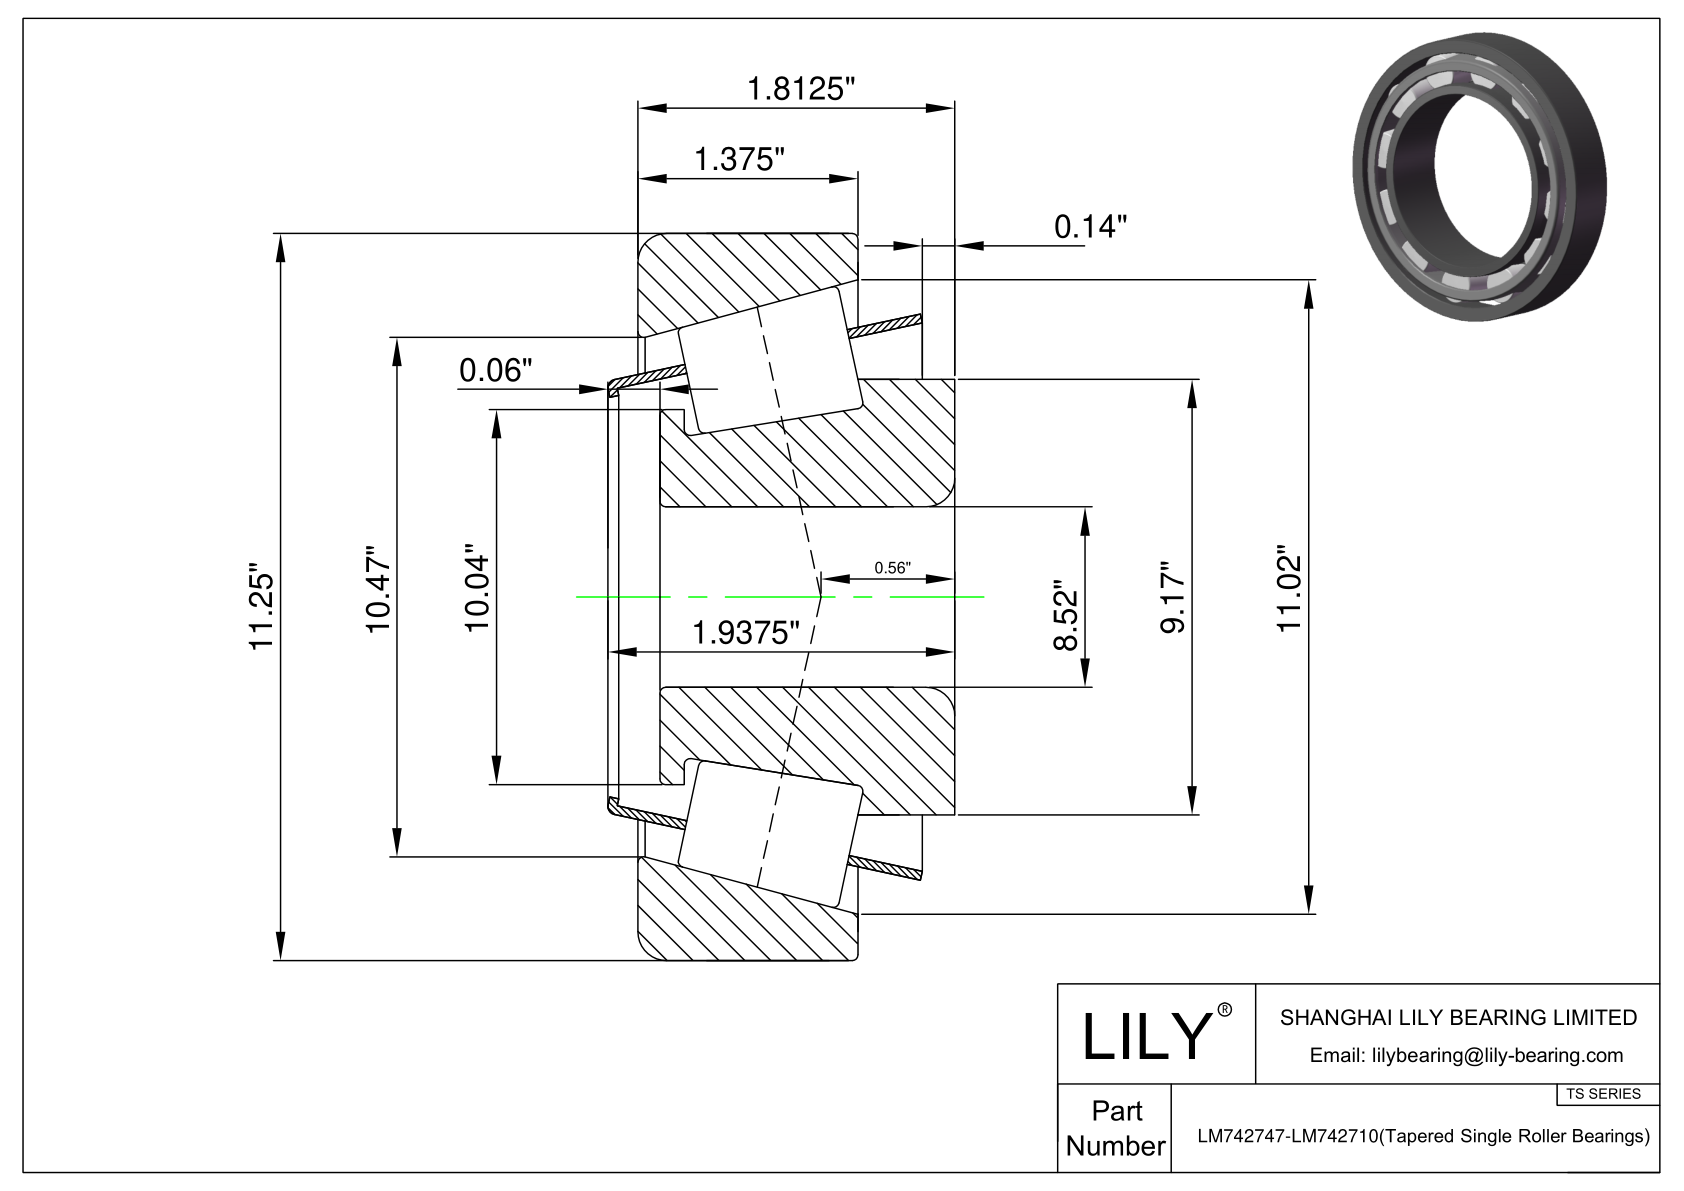 LM742747-LM742710 TS (Tapered Single Roller Bearings) (Imperial) cad drawing